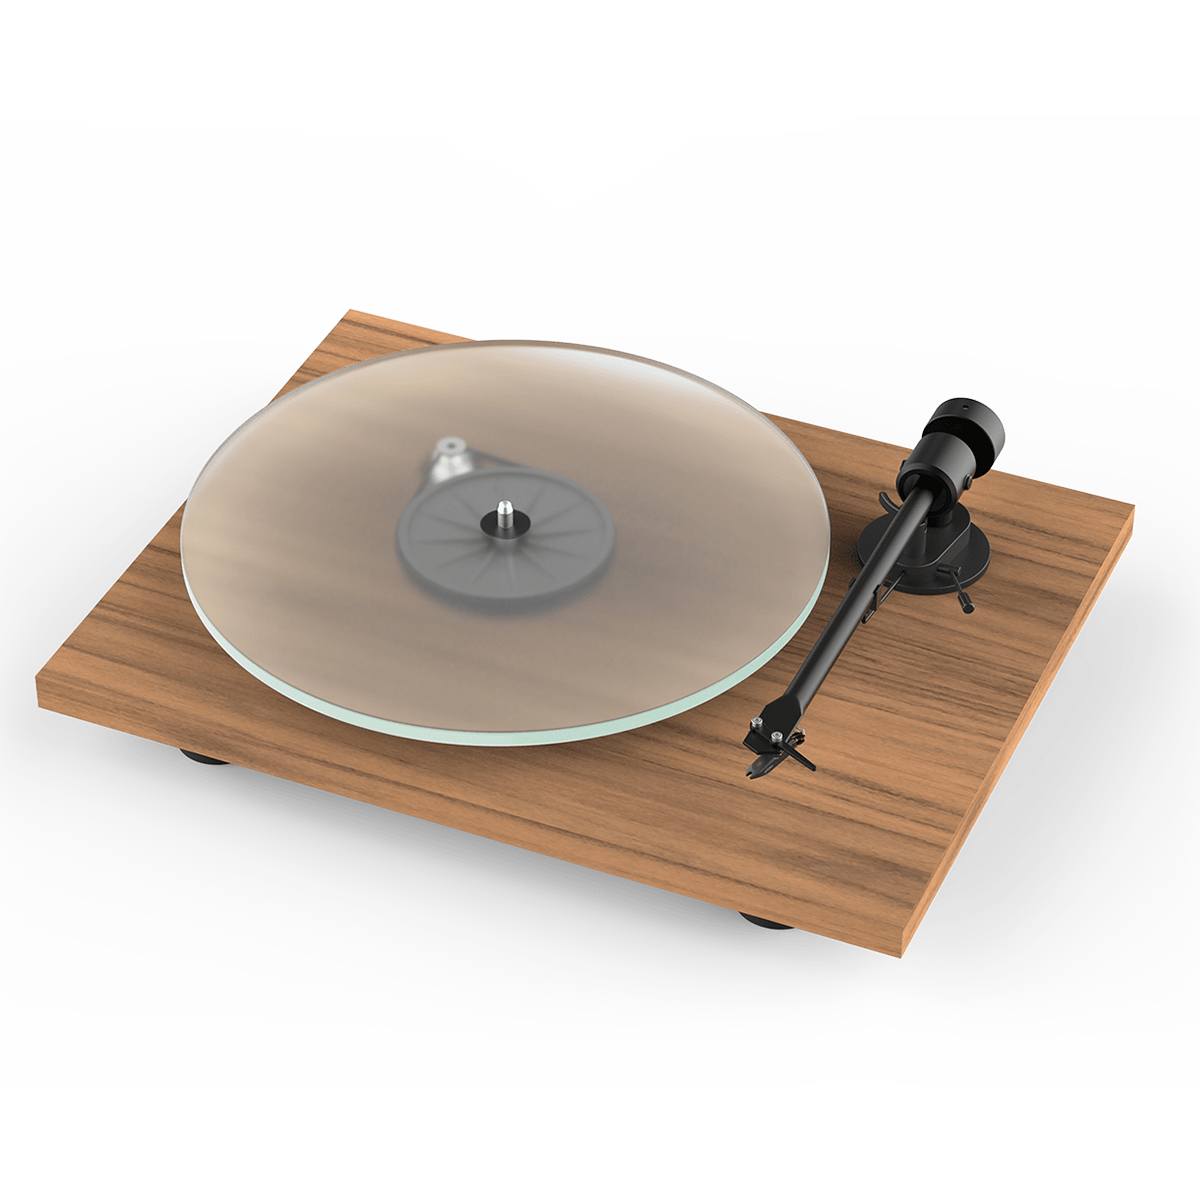 Pro-Ject T1 Phono BT Turntable, Satin Walnut, front angle without felt mat